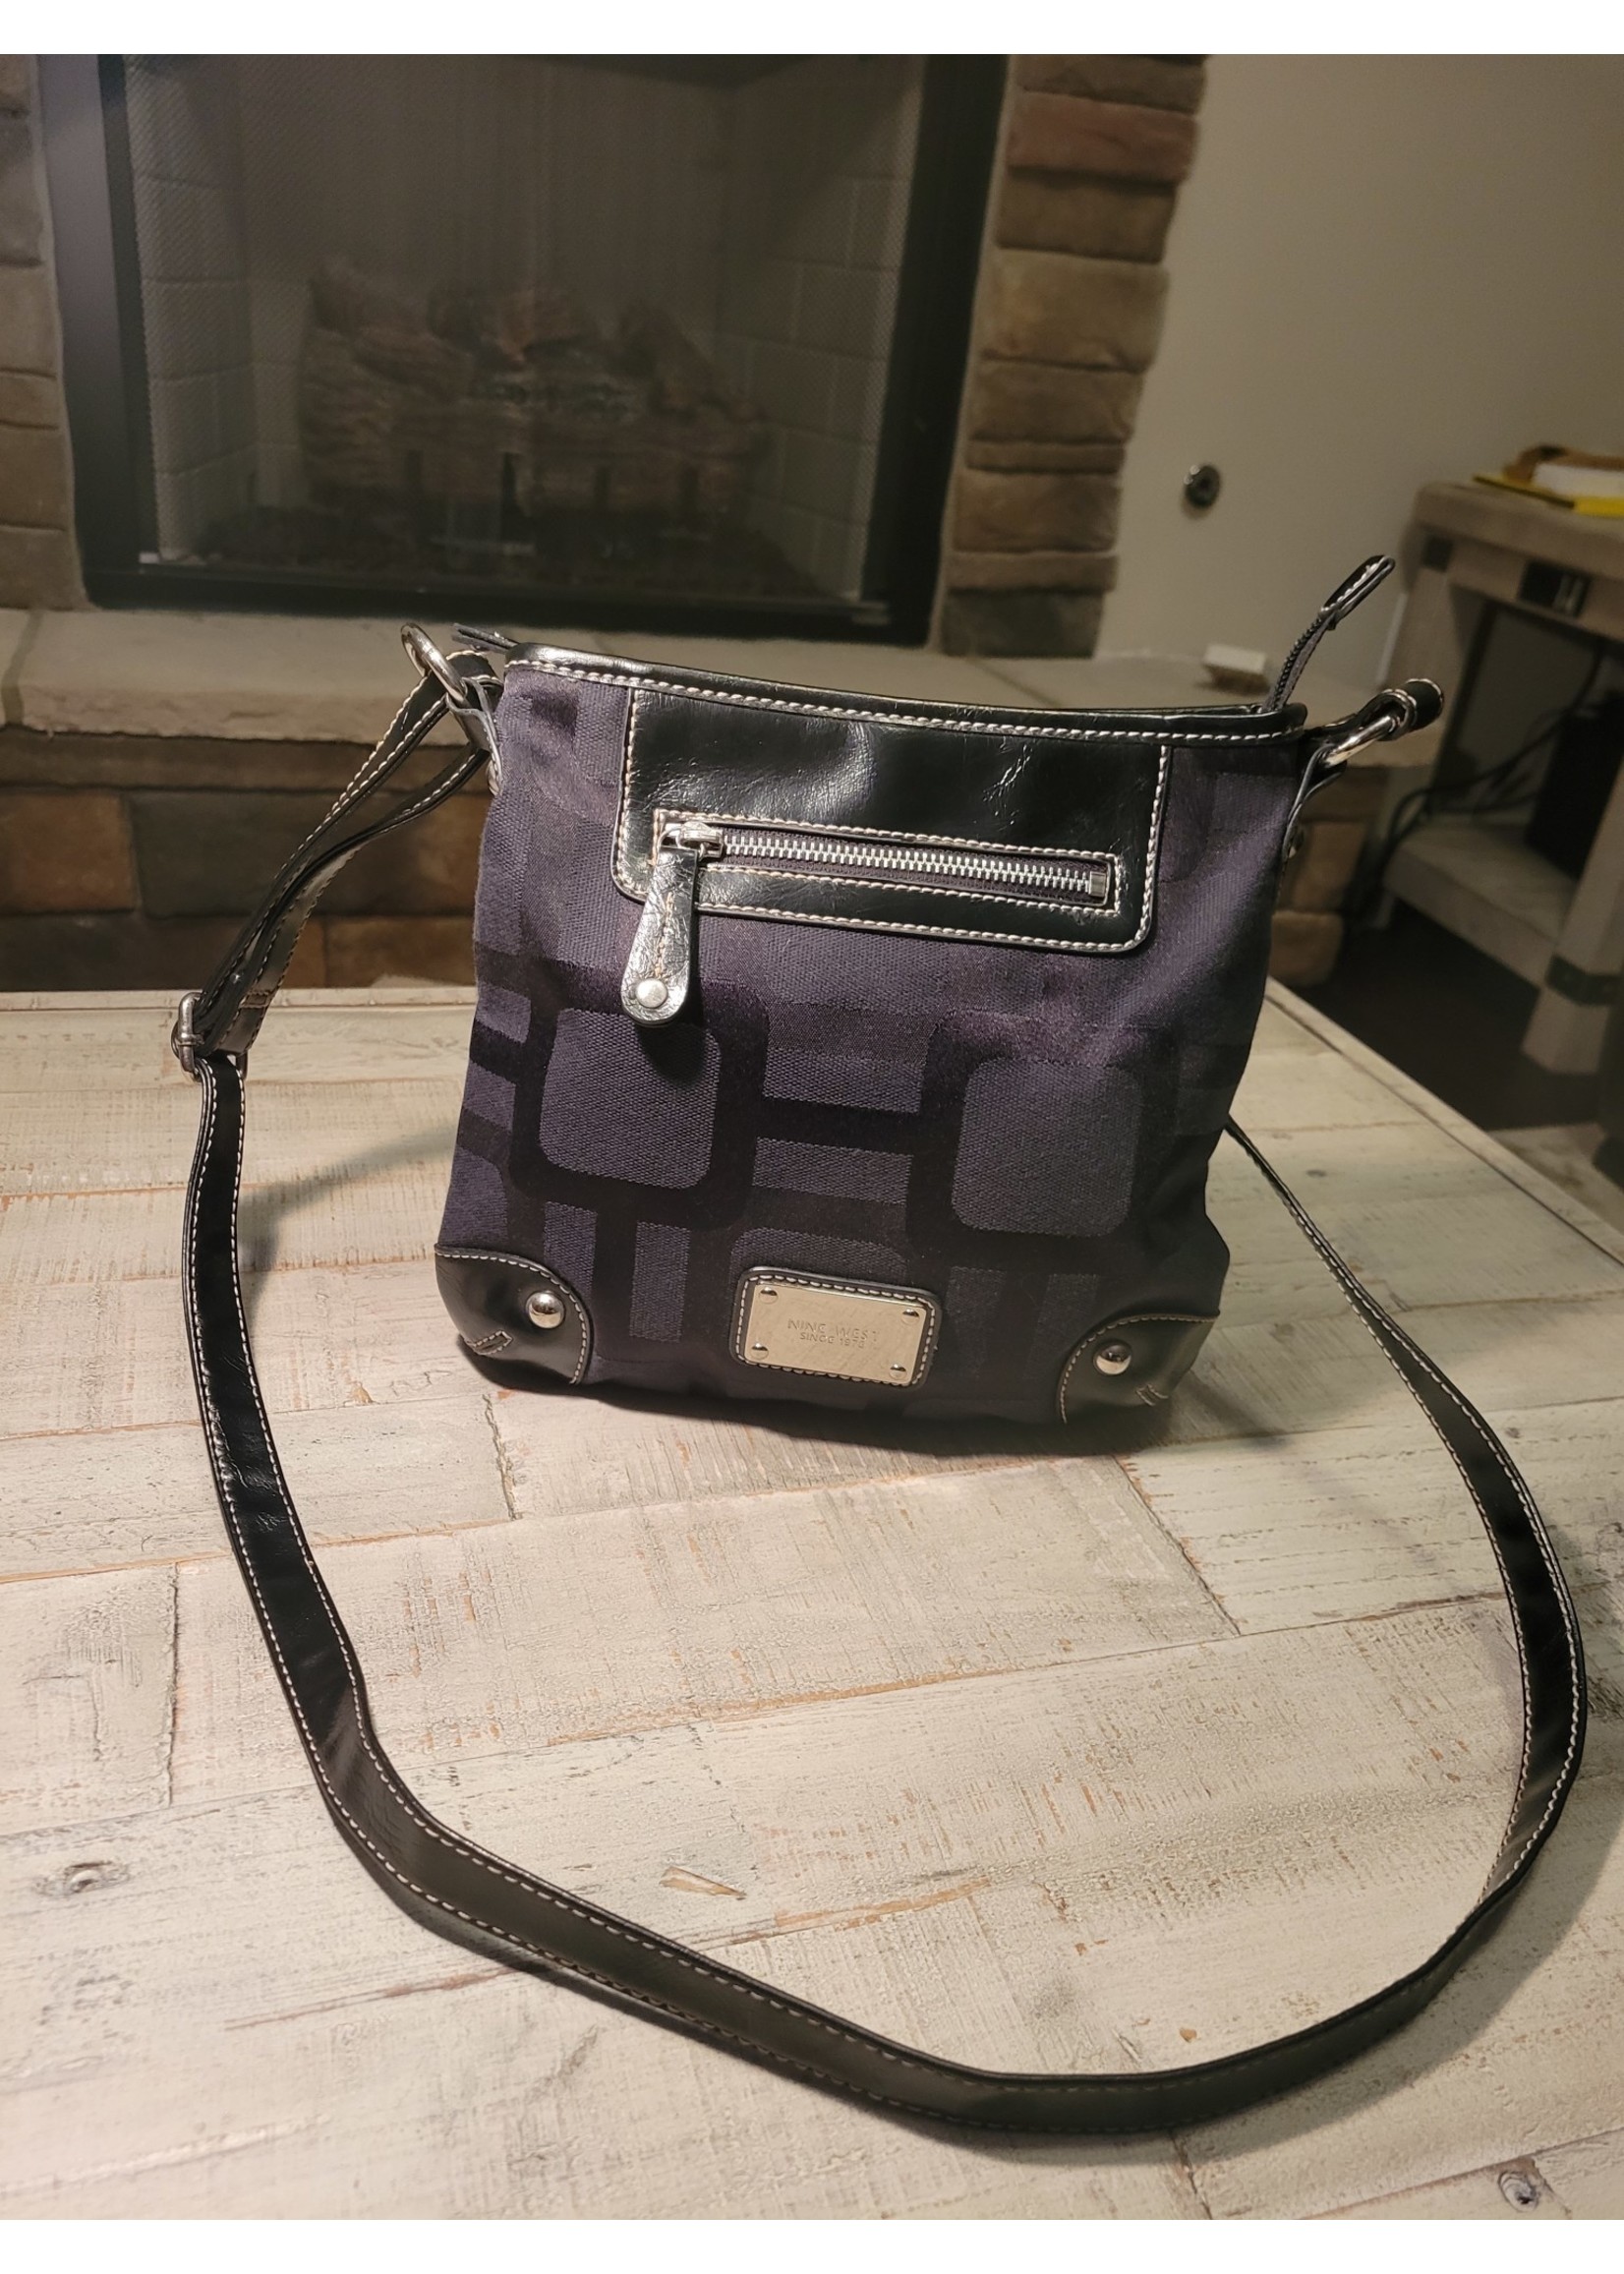 Nine West fabric crossbody purse, size small, black and gray